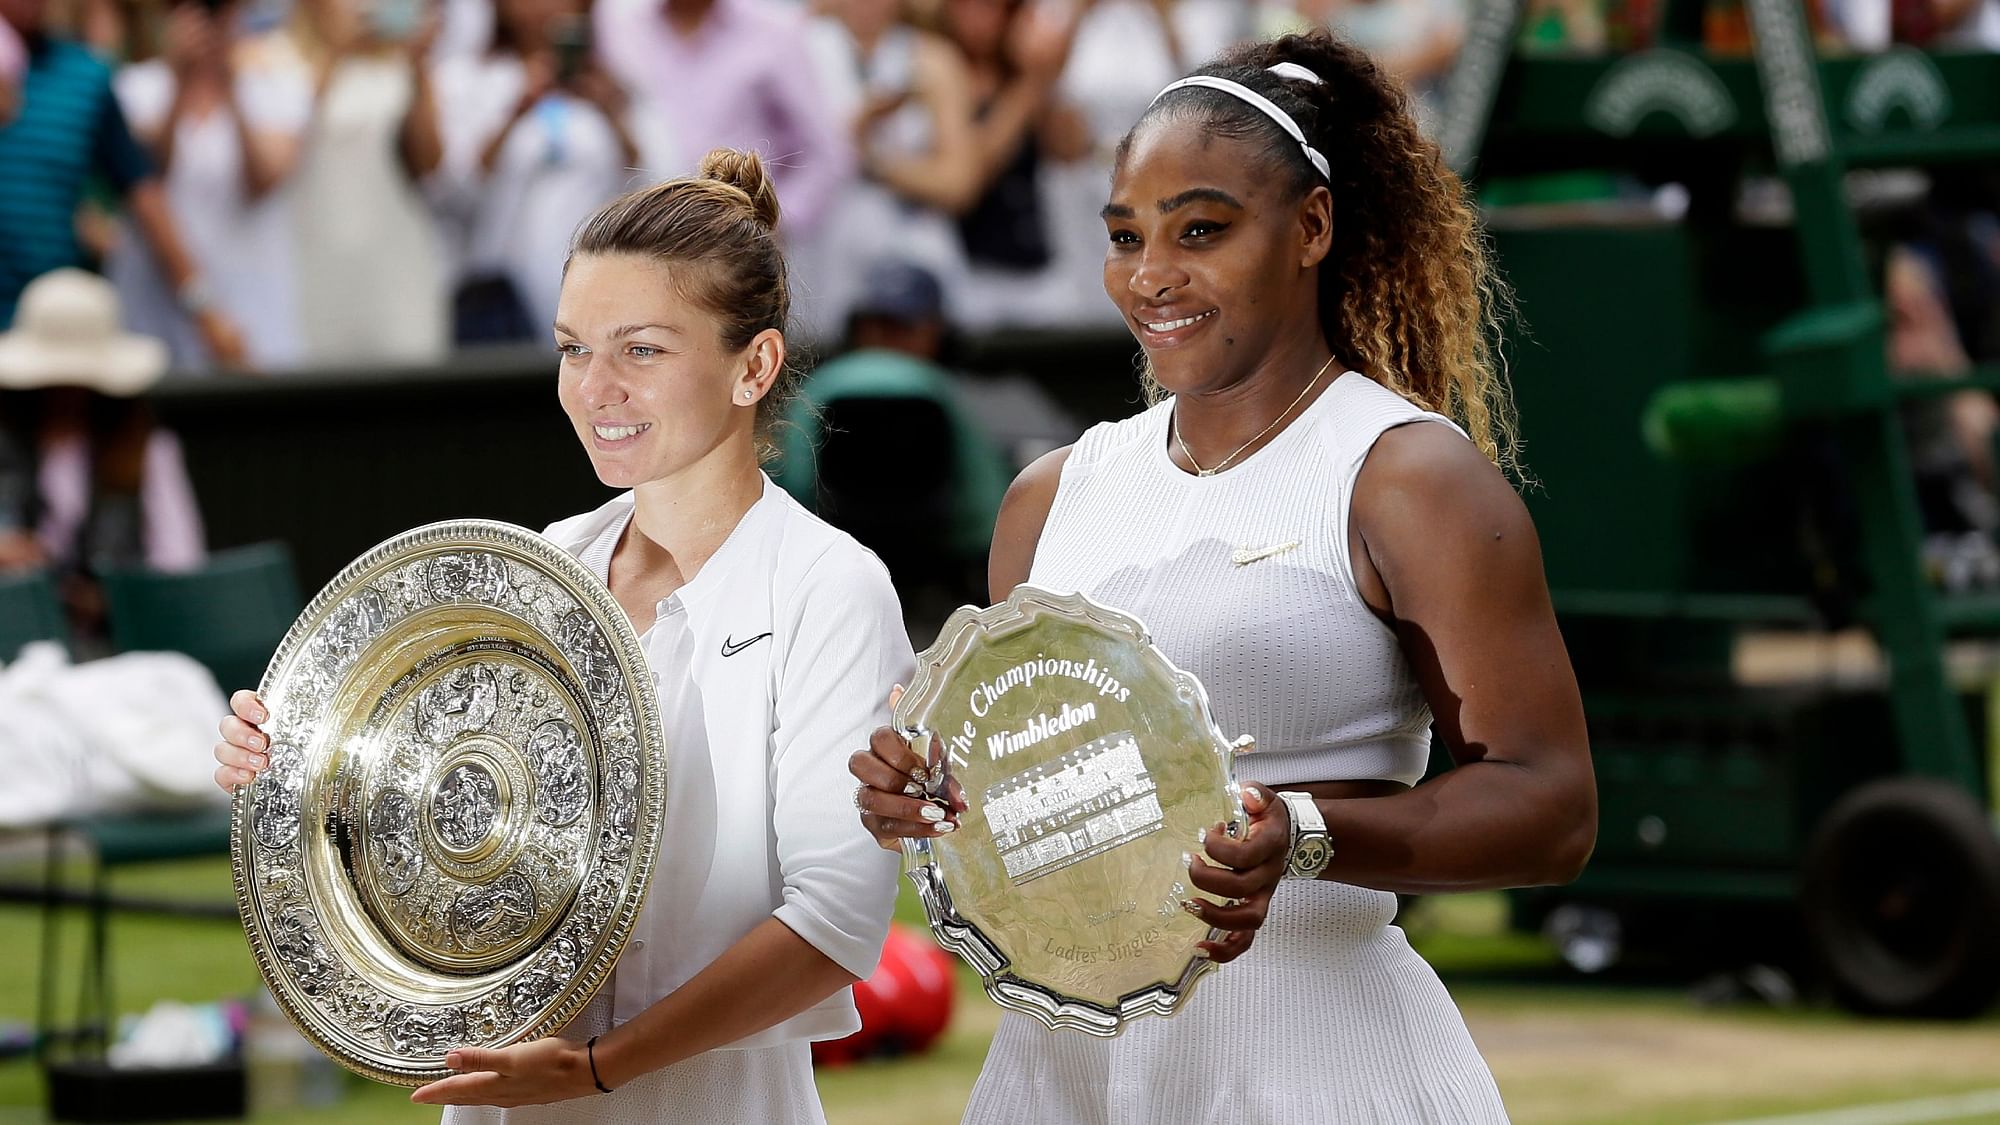 Winner Romania’s Simona Halep and second placed United States’ Serena Williams, right, pose with their trophies after the women’s singles final match on day twelve of the Wimbledon Tennis Championships in London.